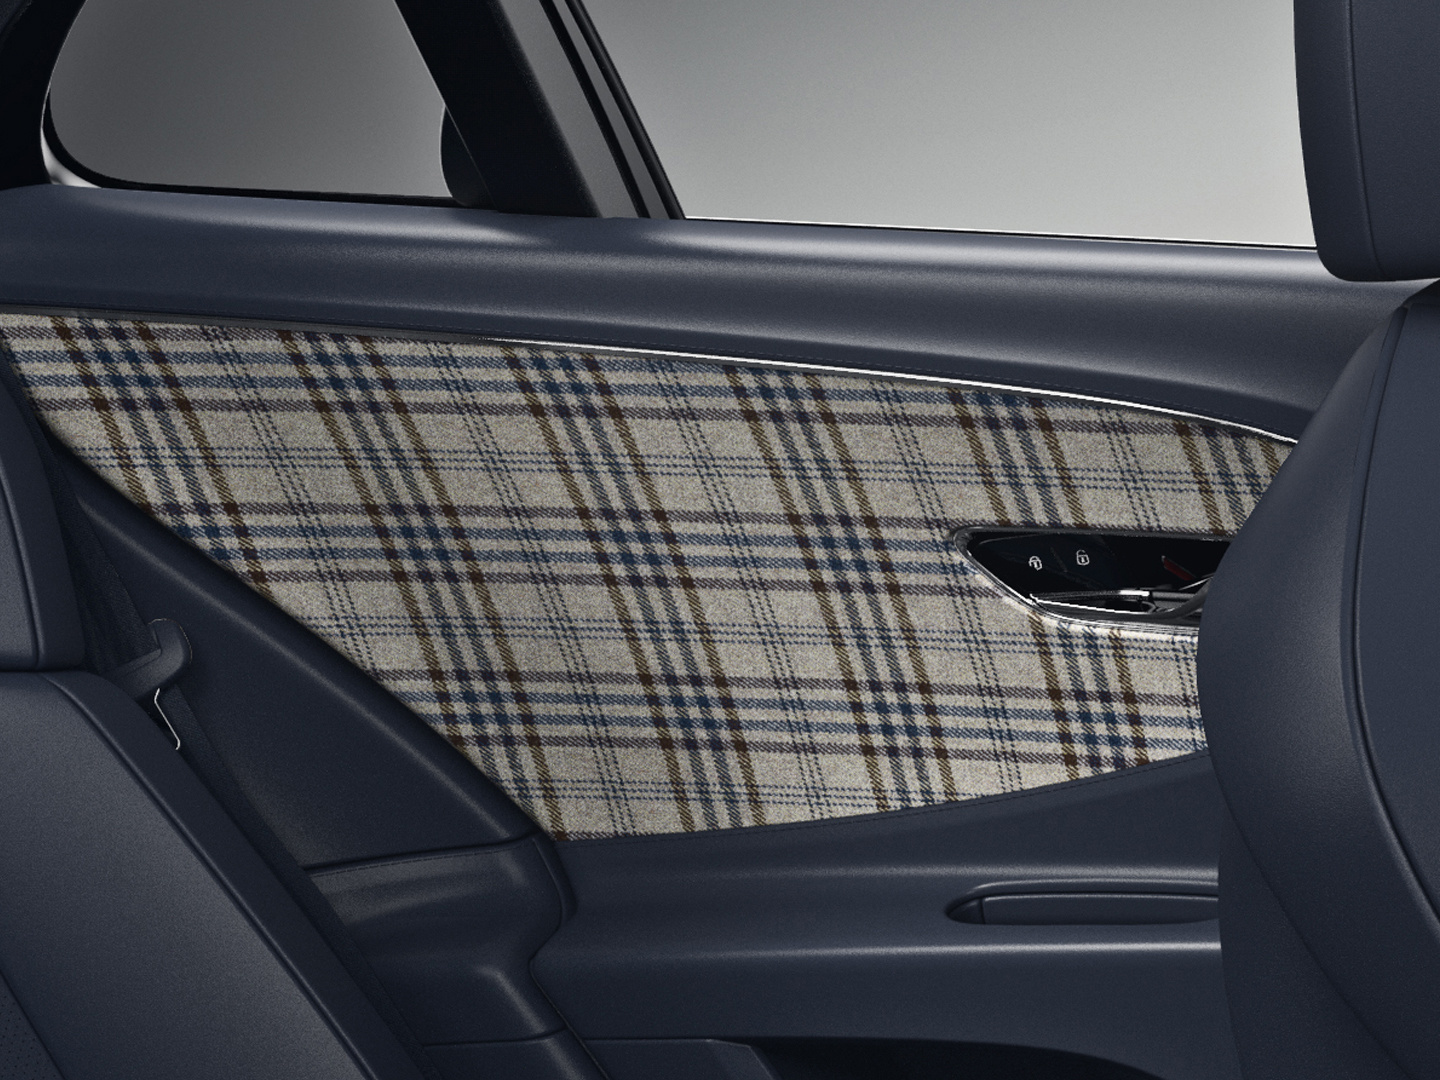 A new tweed interior is available in three Bentley models.